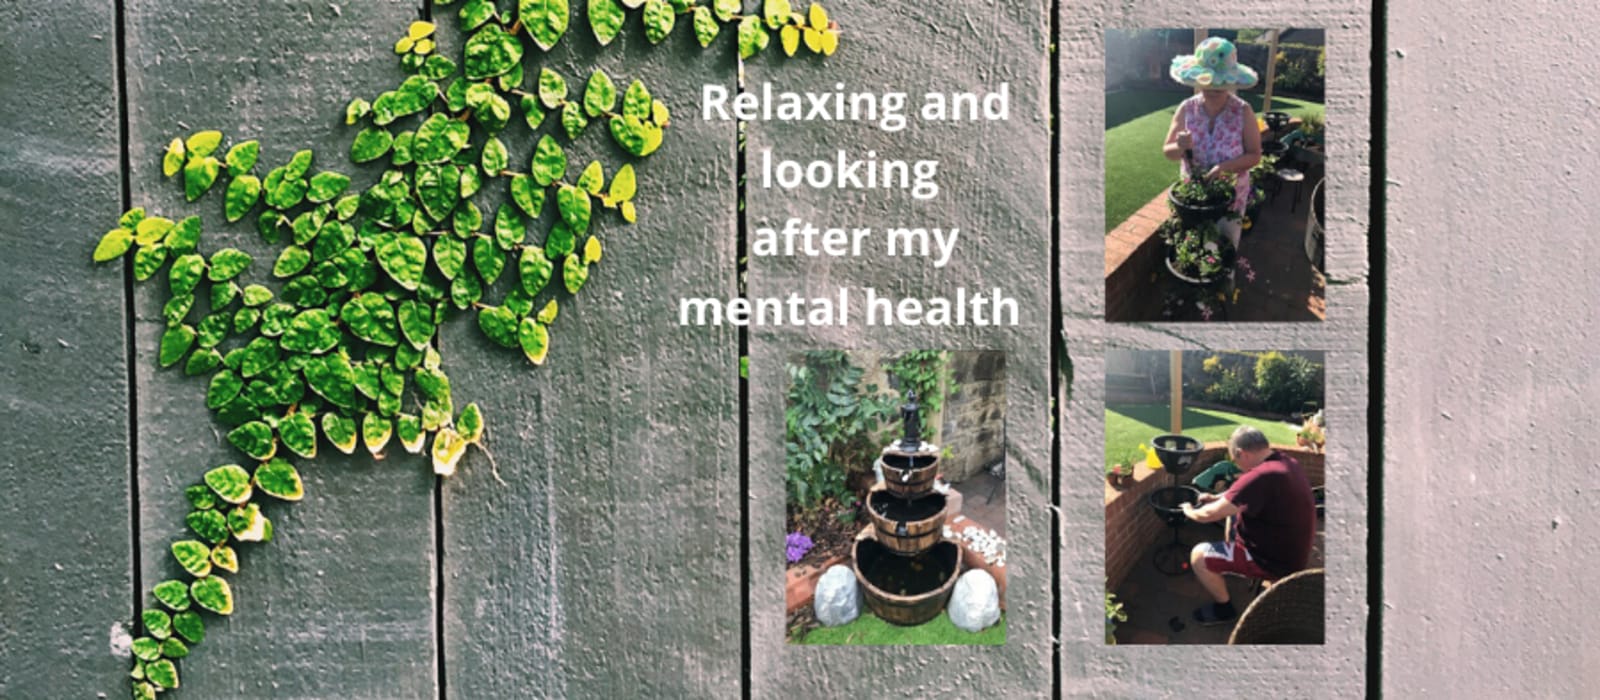 Our garden water feature has helped me relax and maintain my mental health